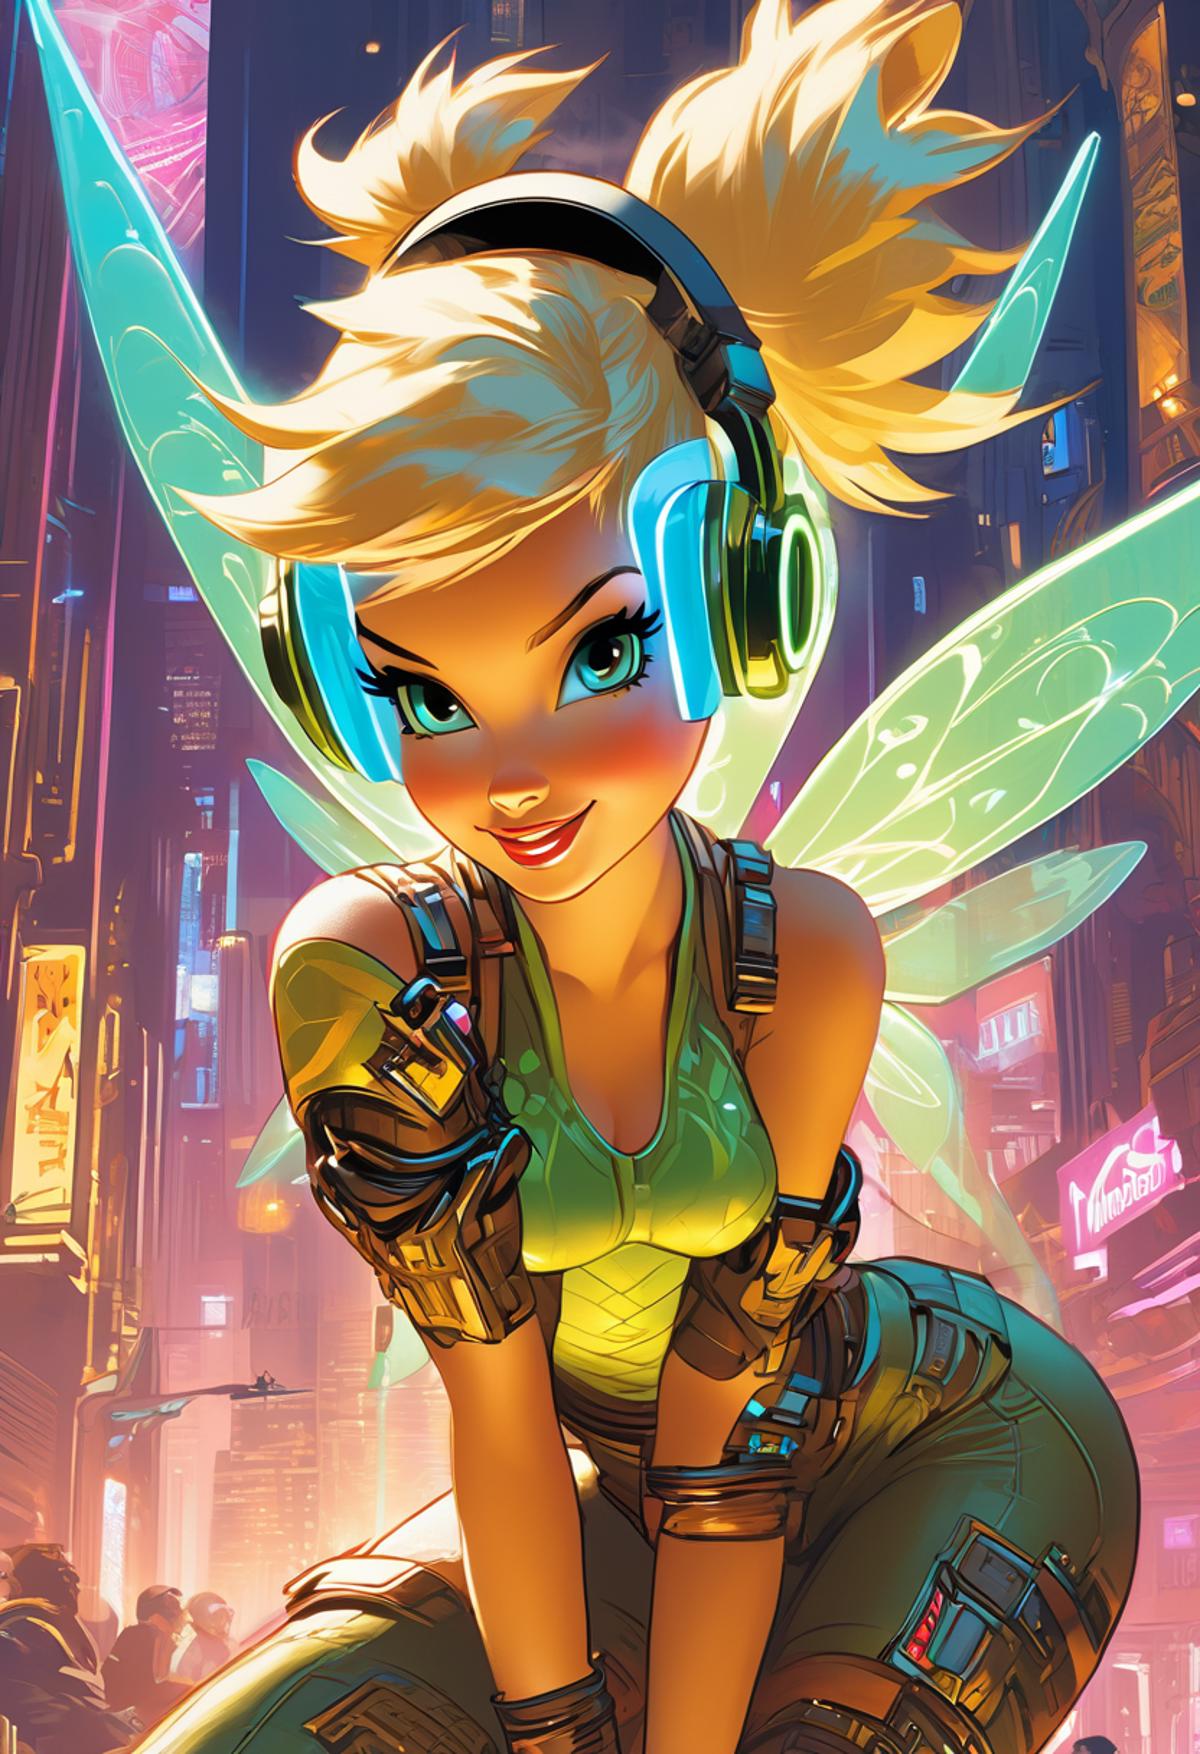 A cartoon illustration of a girl wearing a green shirt and headphones, with a green fairy-like appearance.